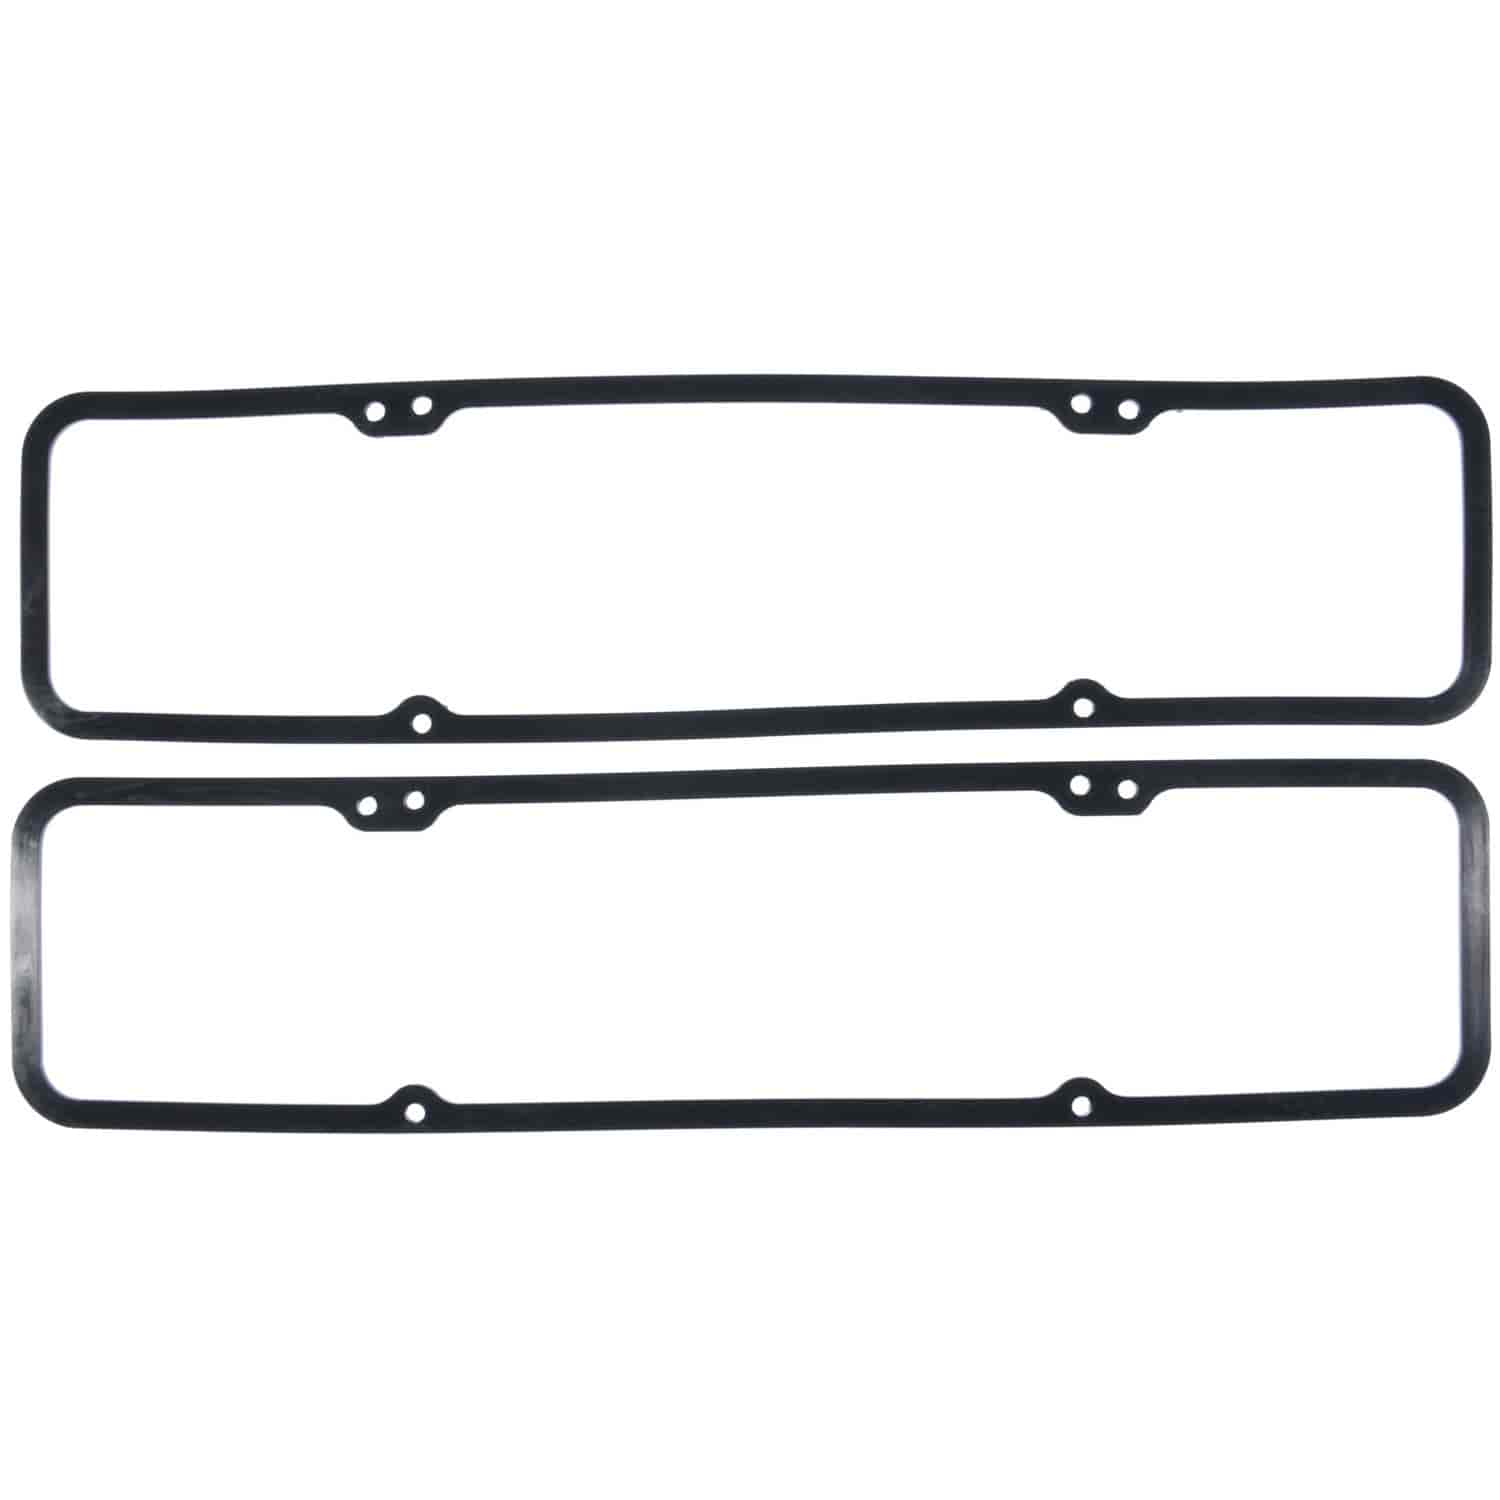 Valve Cover Gasket Set 1955-1986 Small Block Chevy 265/283/302/305/307/327/350/400 in Molded Rubber